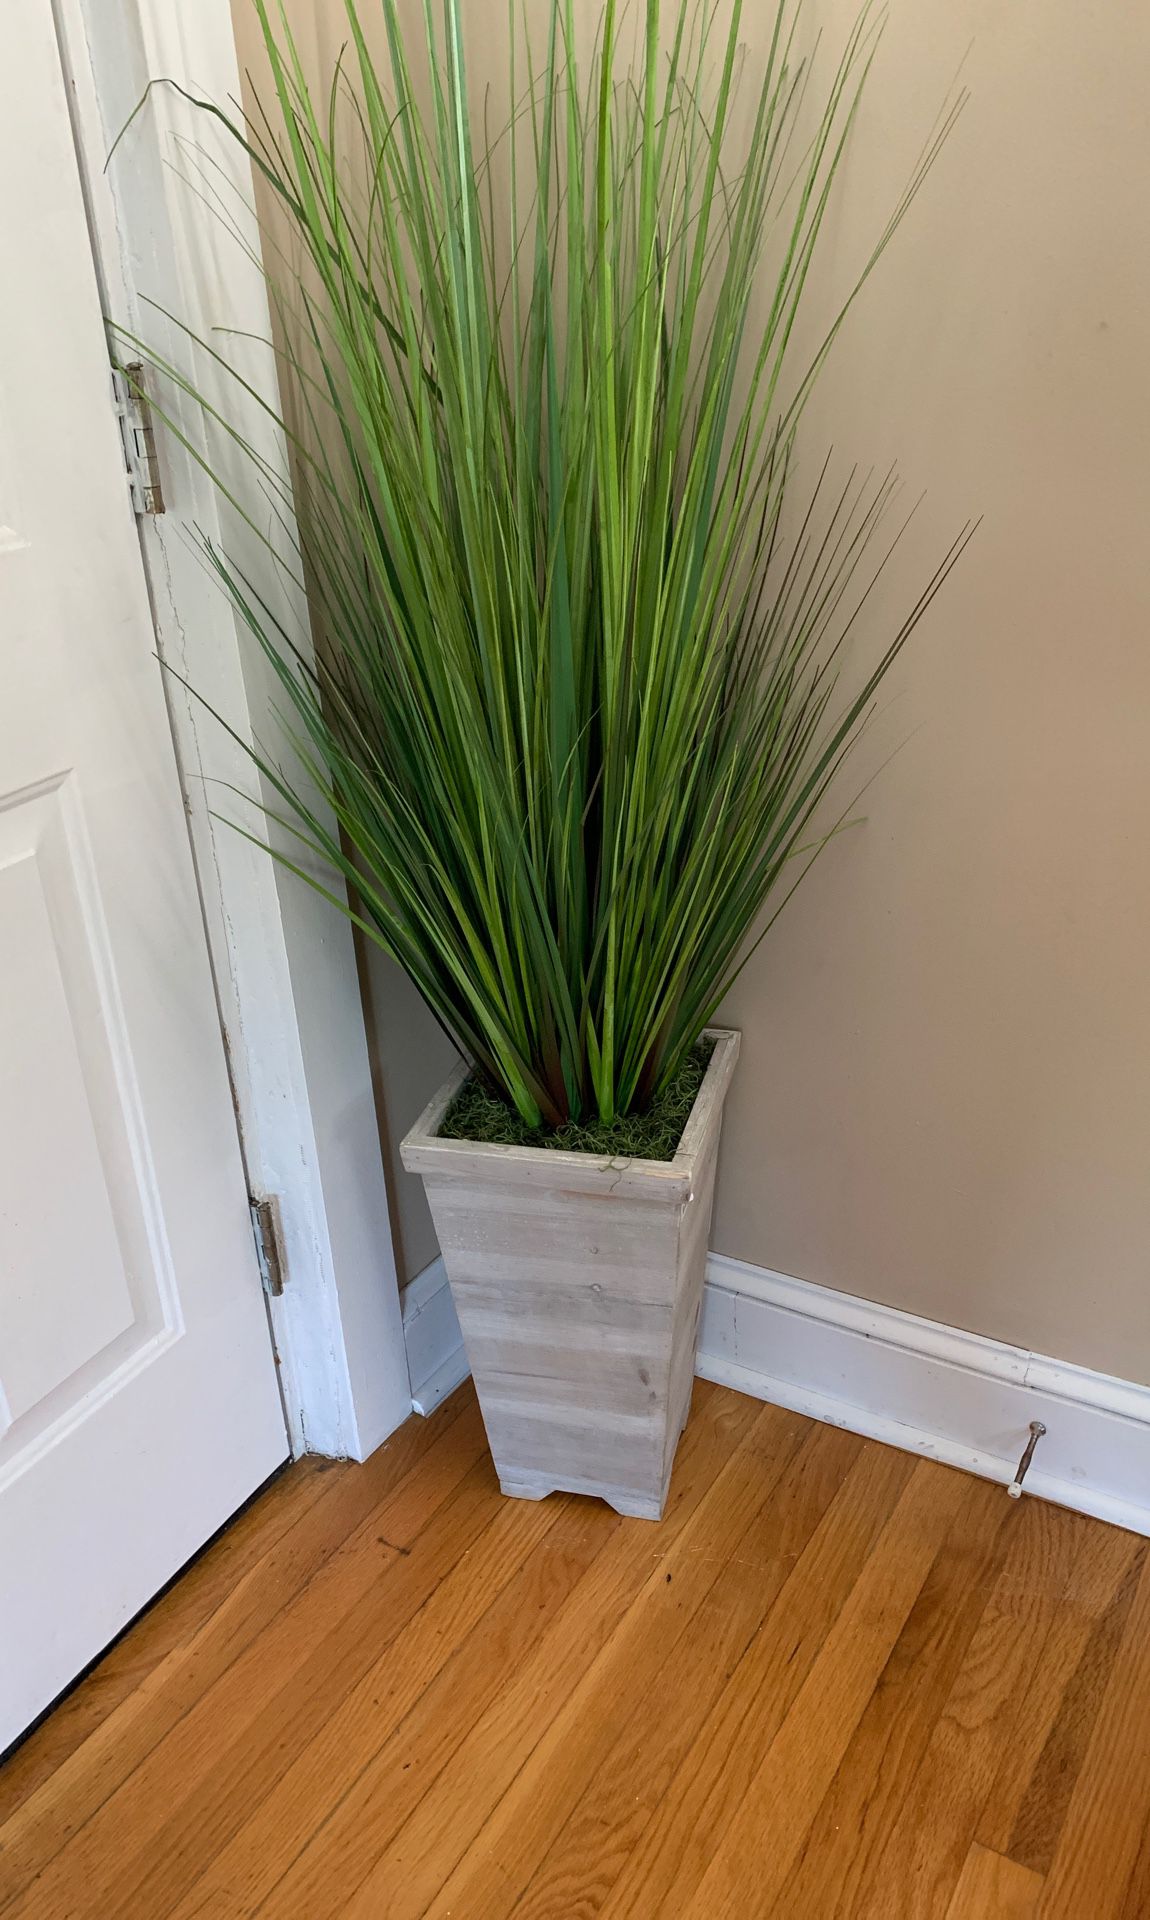 Artificial plant from homegoods $30